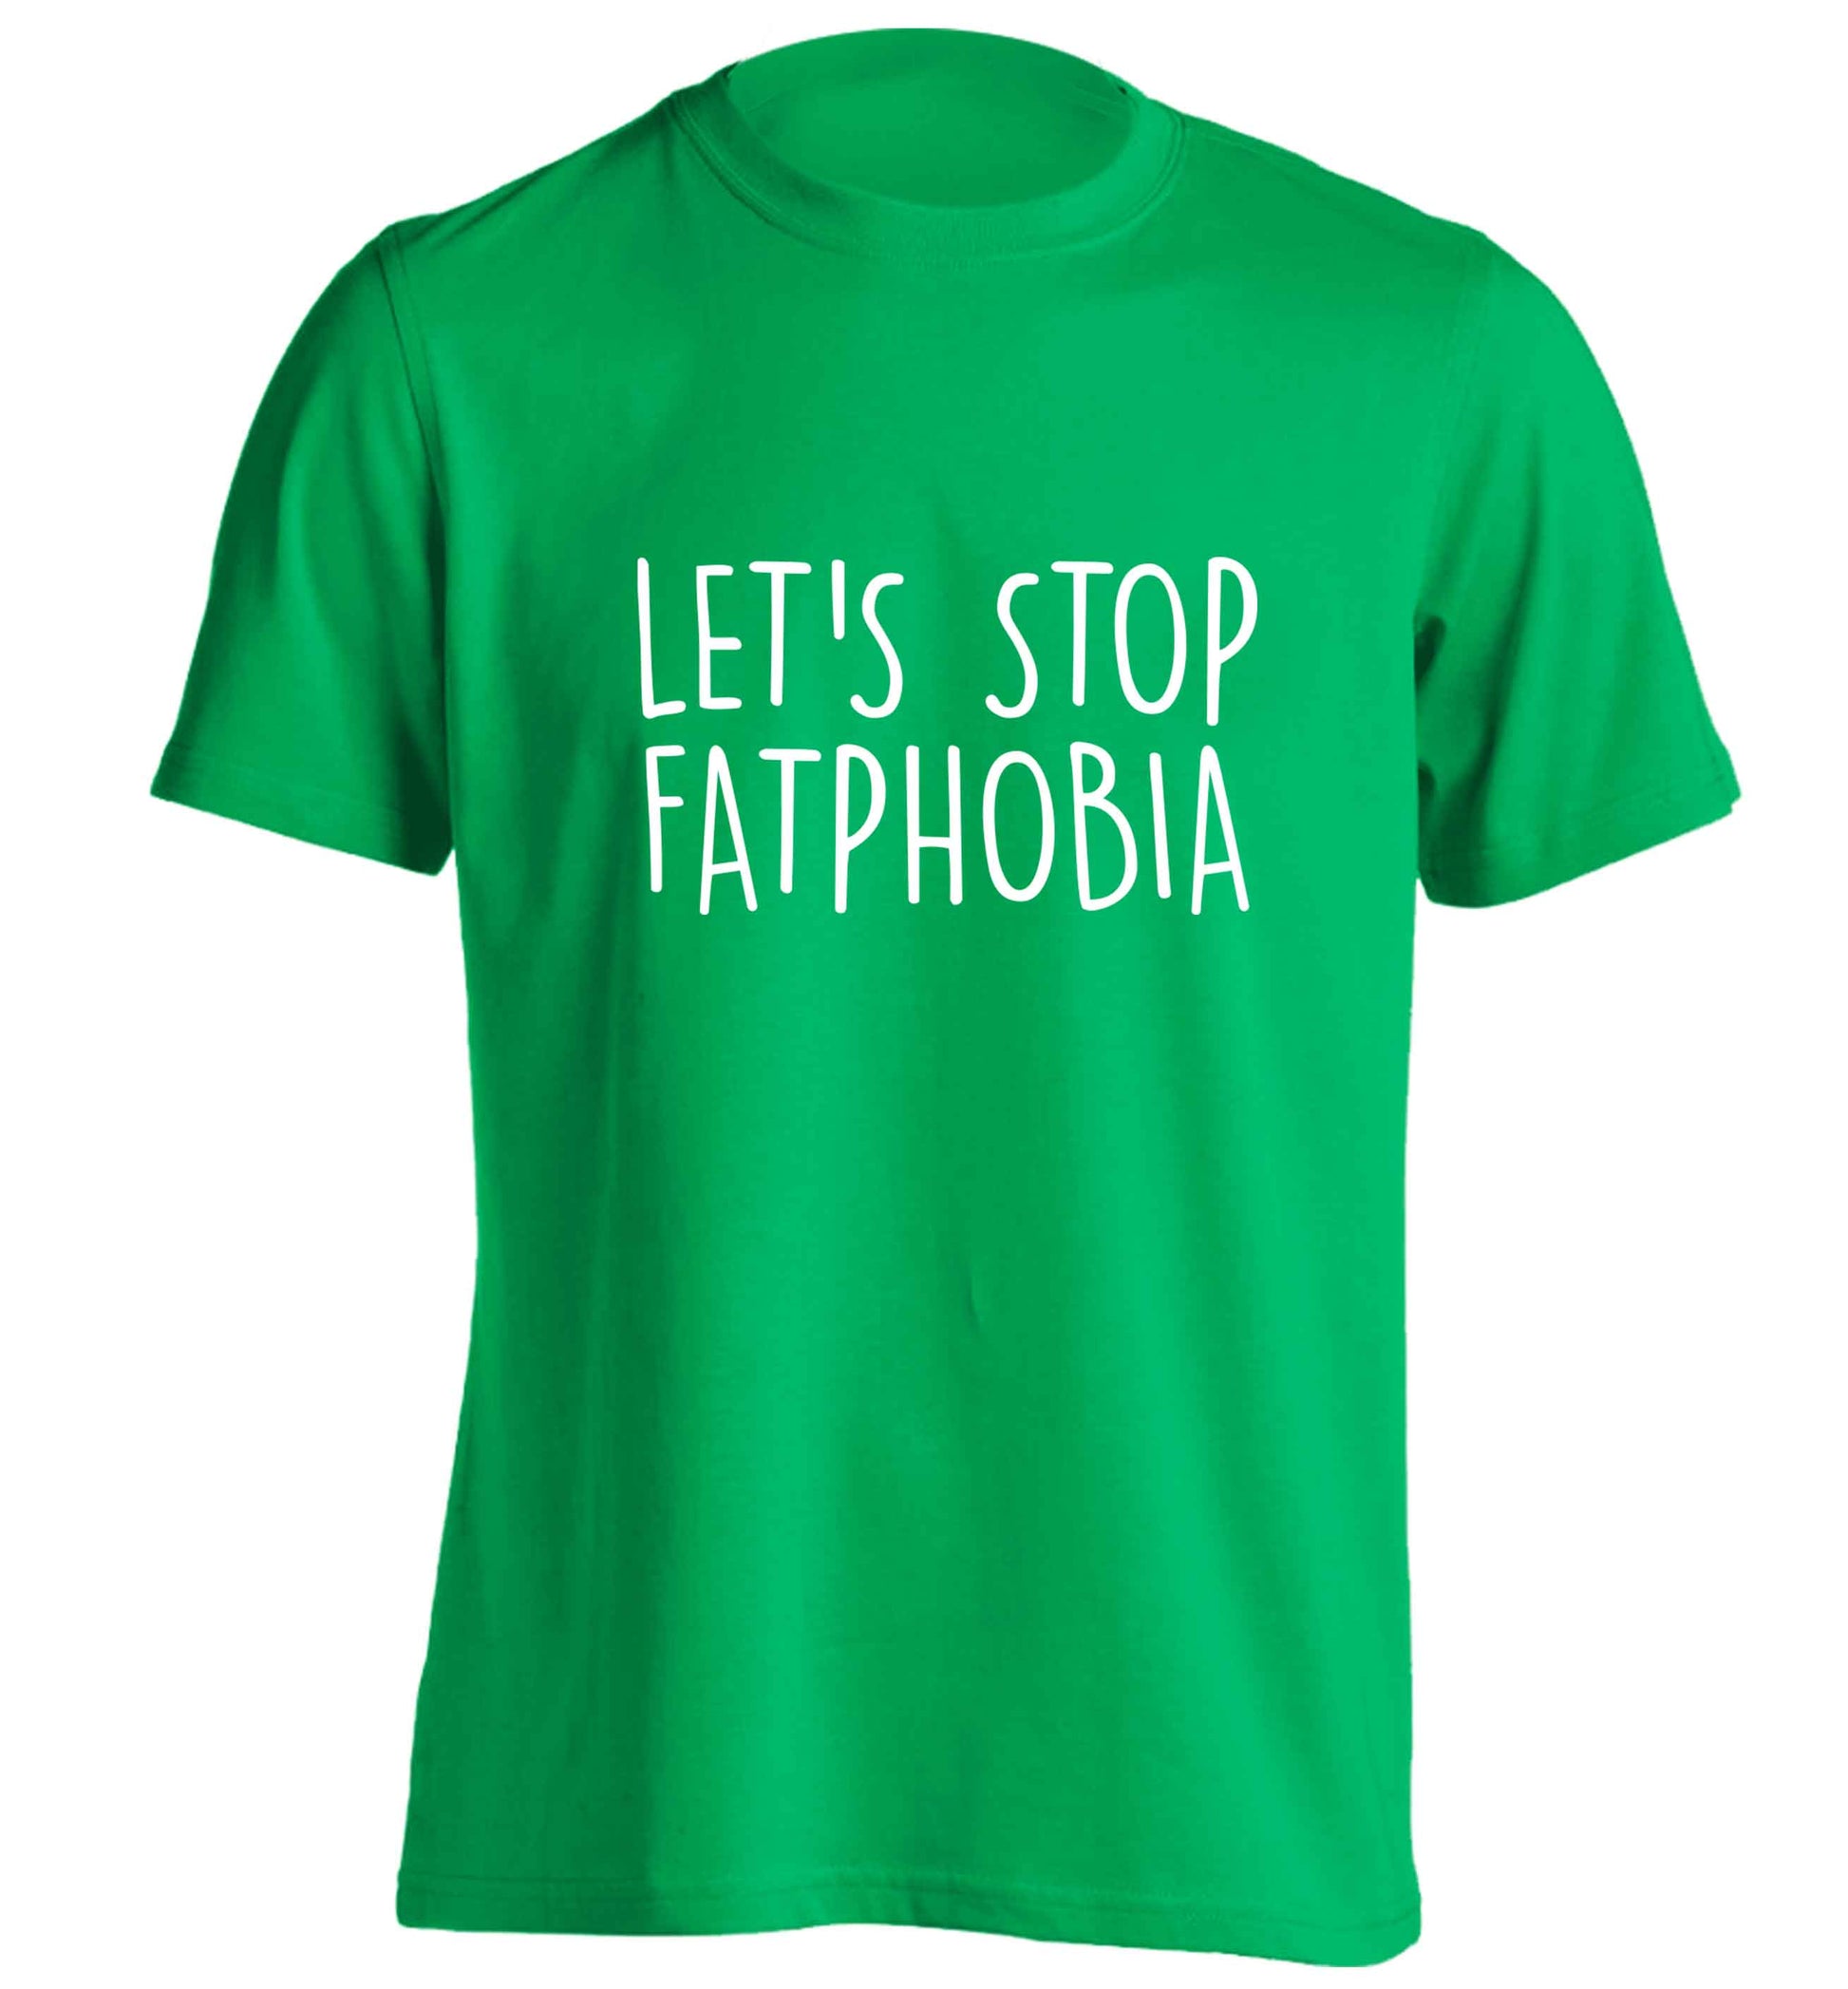 Let's stop fatphobia adults unisex green Tshirt 2XL